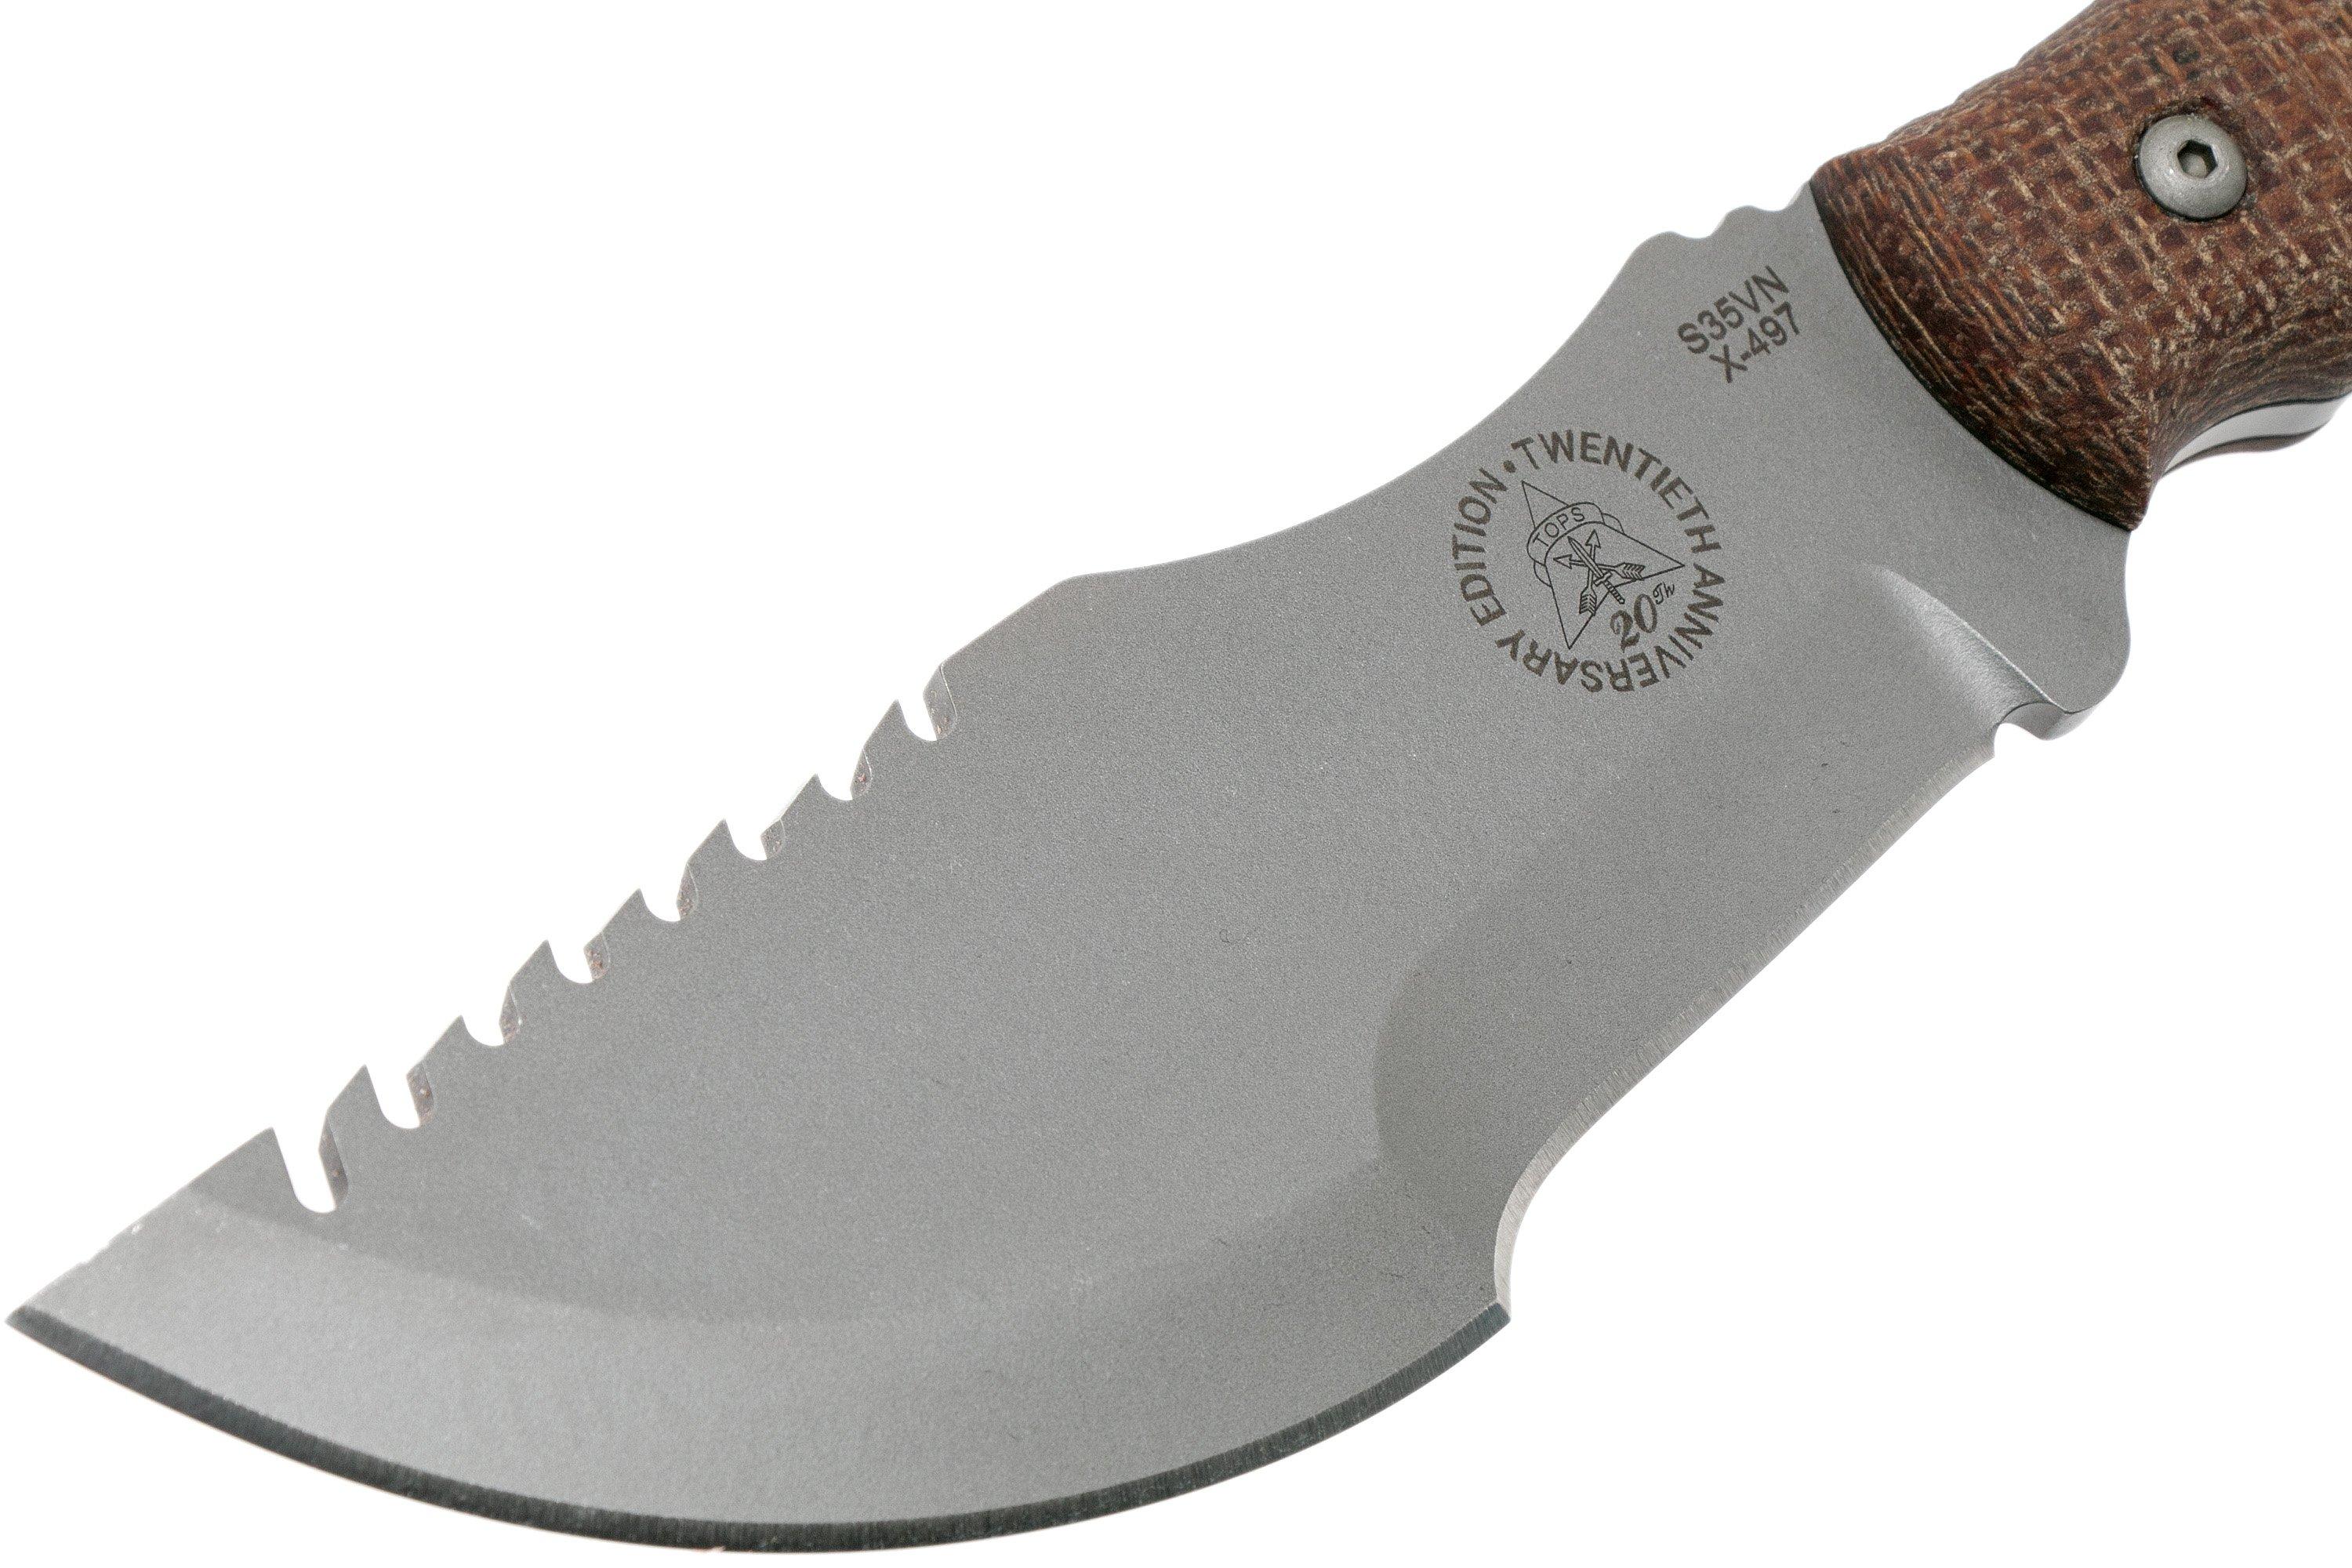 TOPS Knives Tom Brown Tracker #3 20th Anniversary survival knife